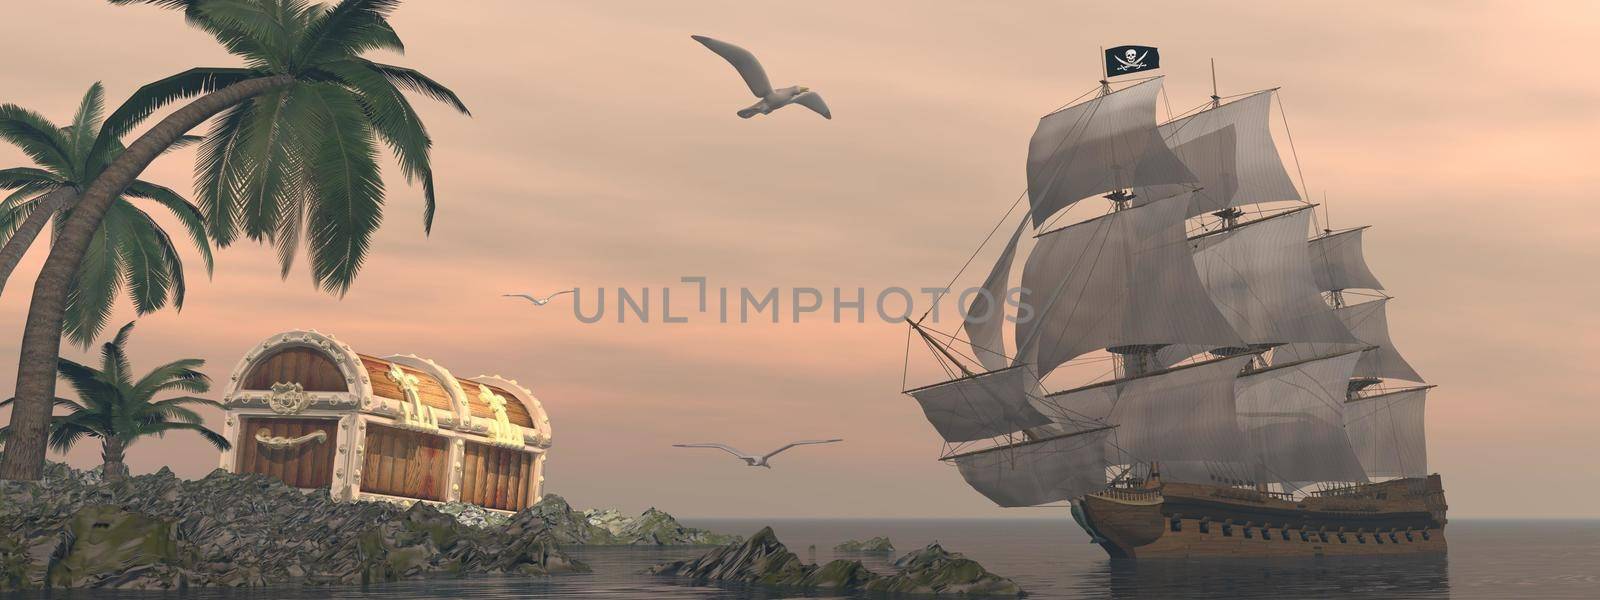 Pirate ship finding treasure - 3D render by Elenaphotos21